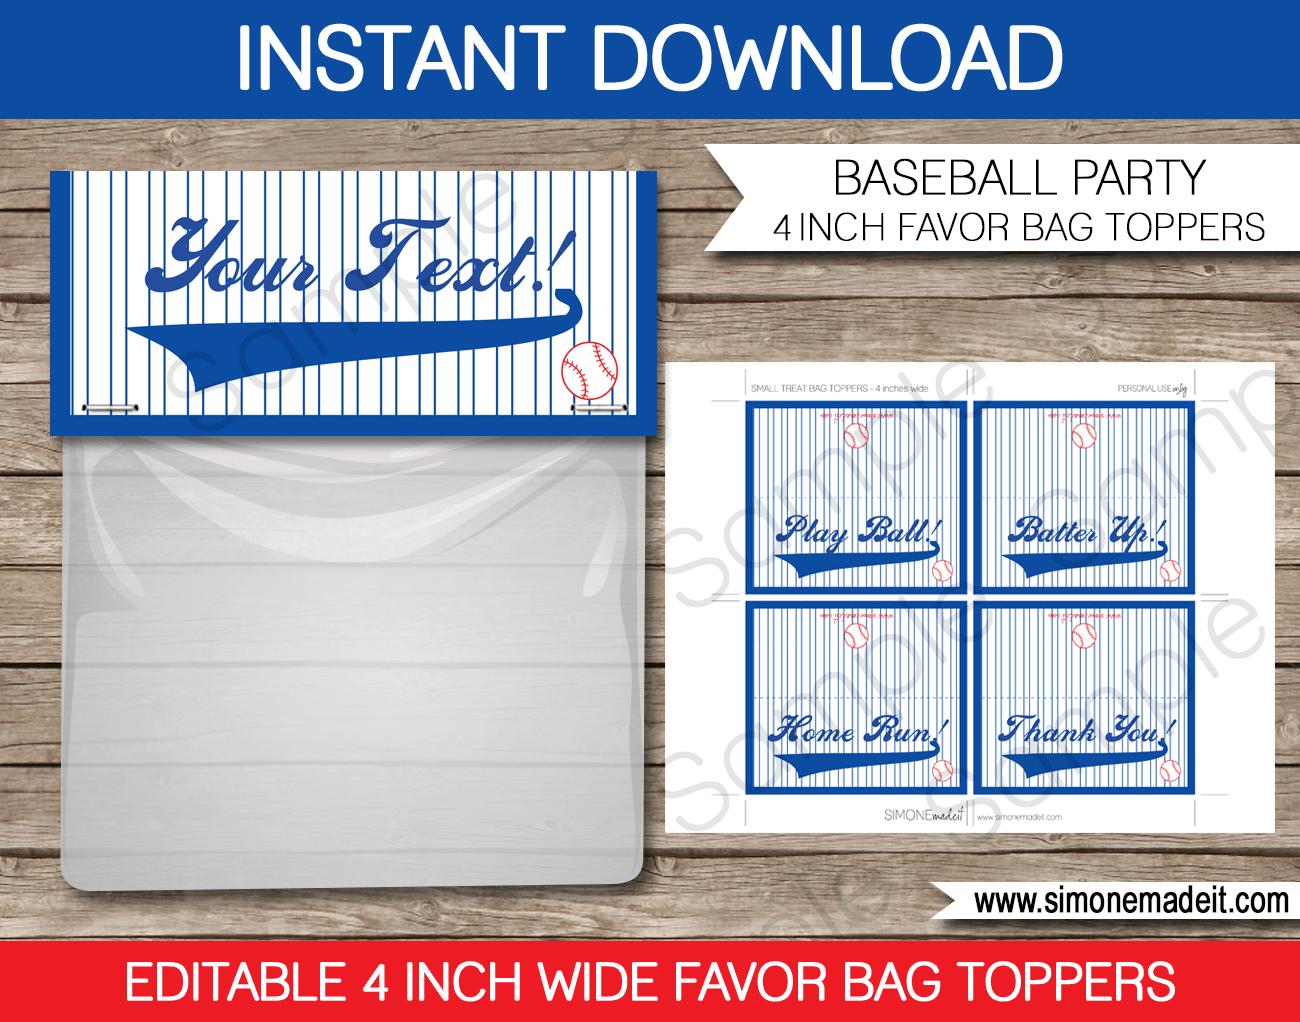 Baseball Party Favor Bag Toppers | Birthday Party | Editable DIY Template | $3.00 INSTANT DOWNLOAD via SIMONEmadeit.com